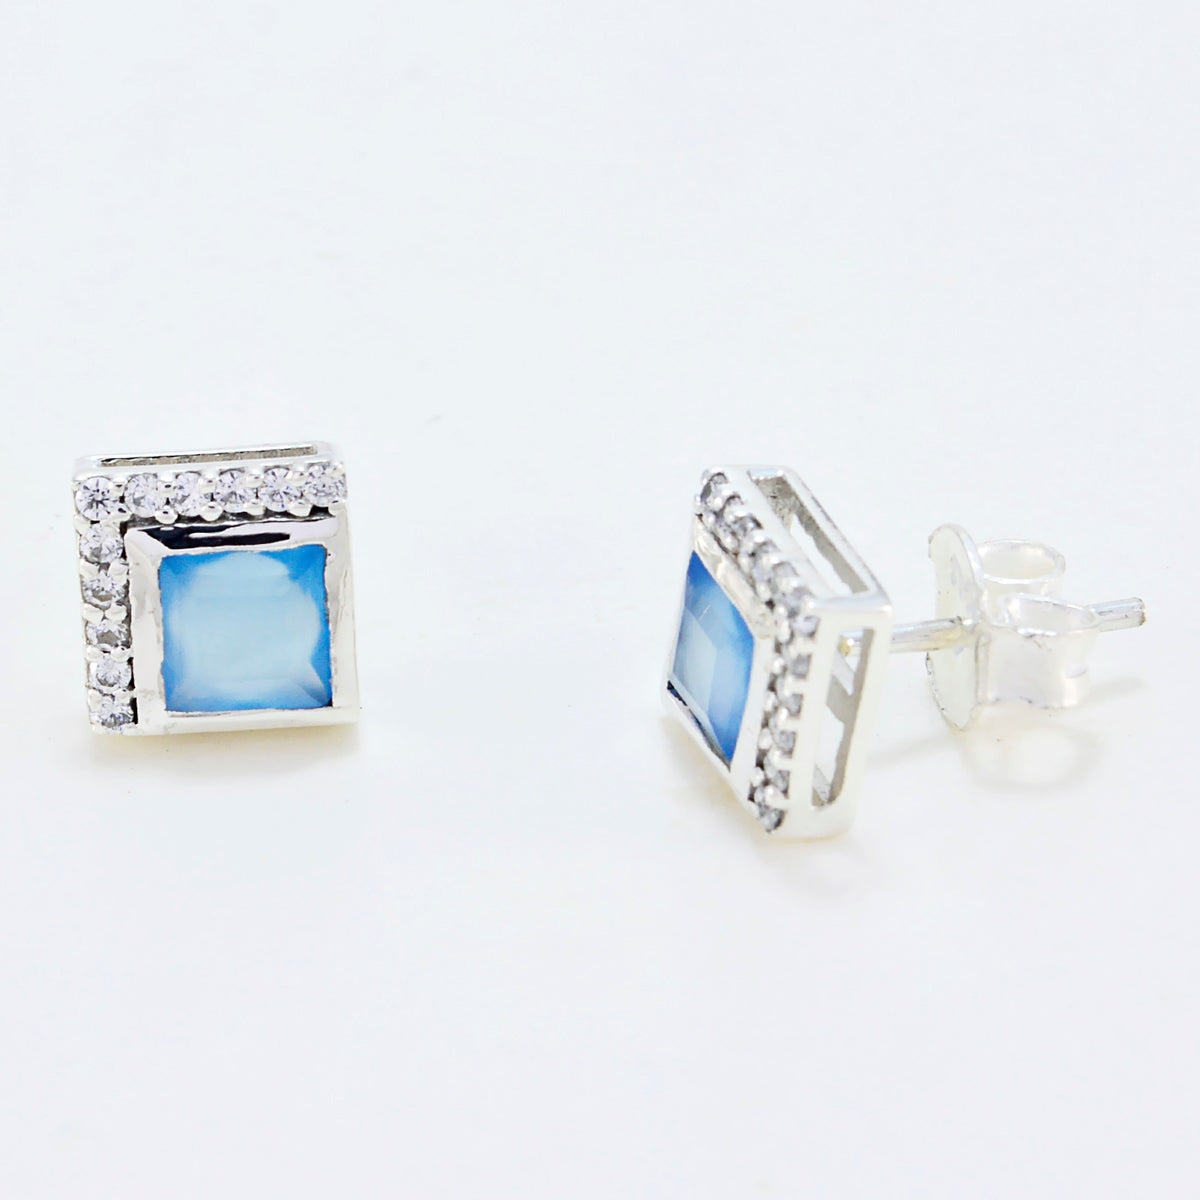 Riyo Nice Gemstone square Faceted Blue Chalcedony Silver Earrings gift for friendship day